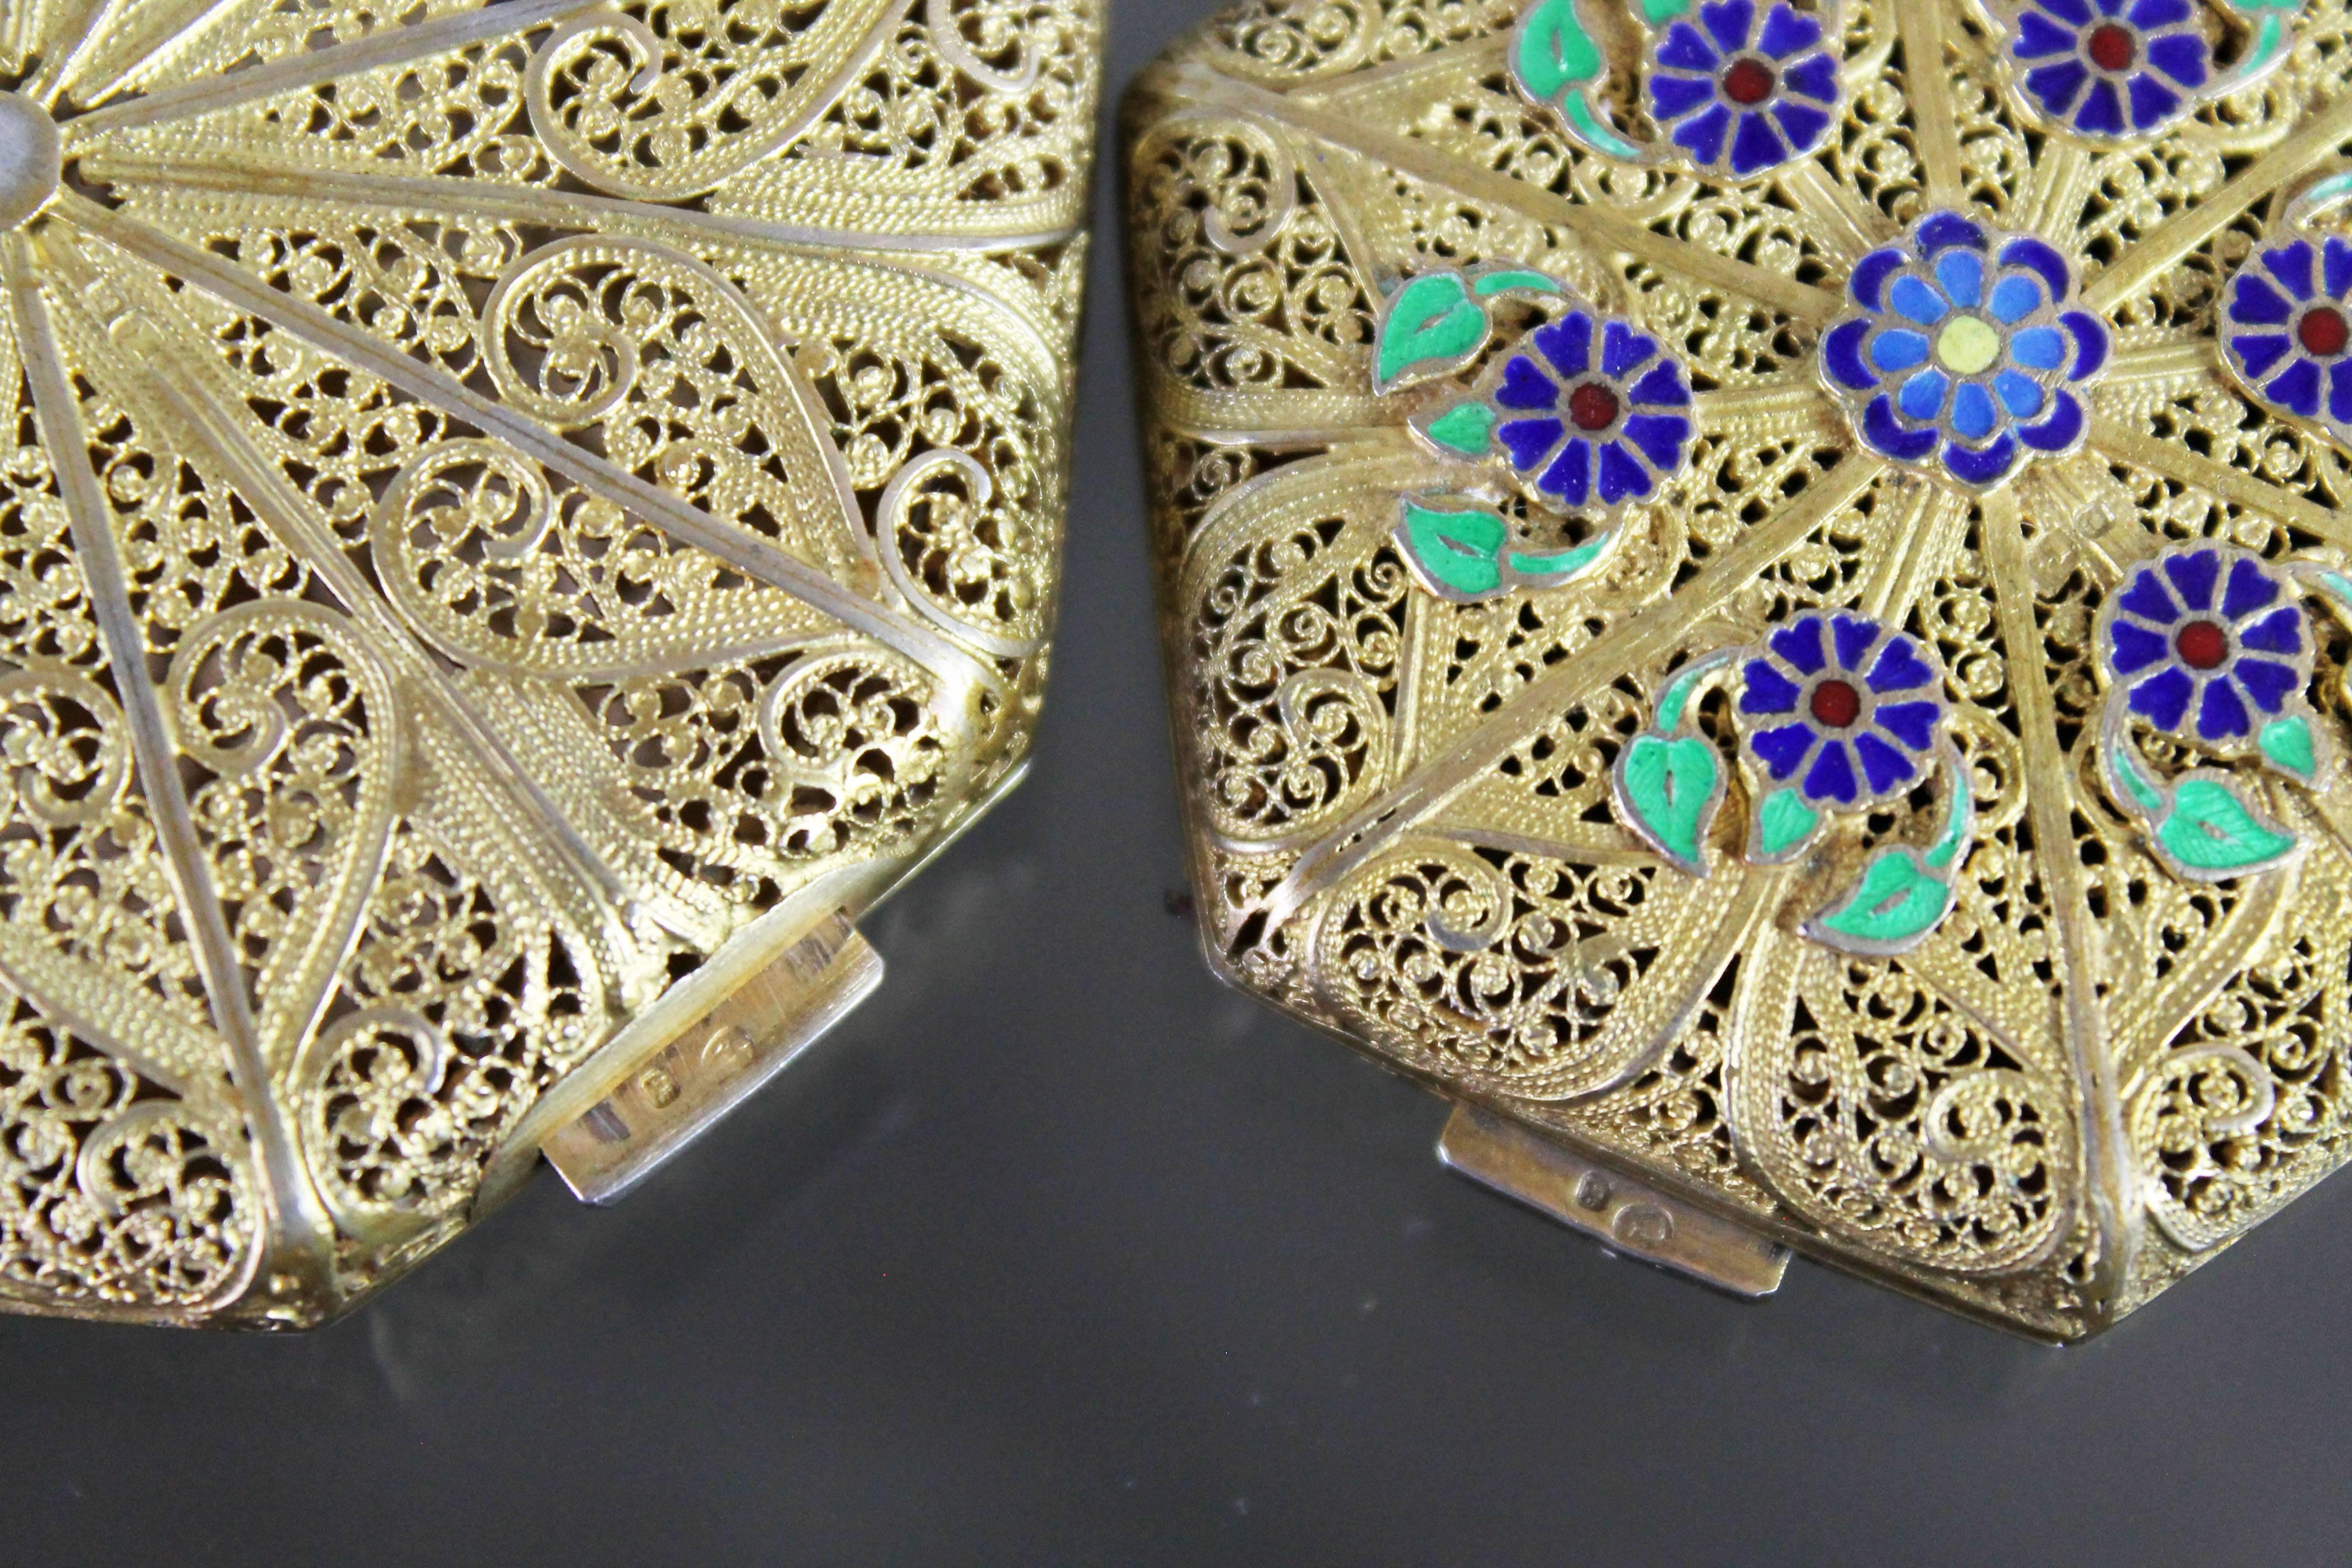 Pair of Octagon Compacts Vermeil Filigree Hallmarked & Enameled Flower Applique 5